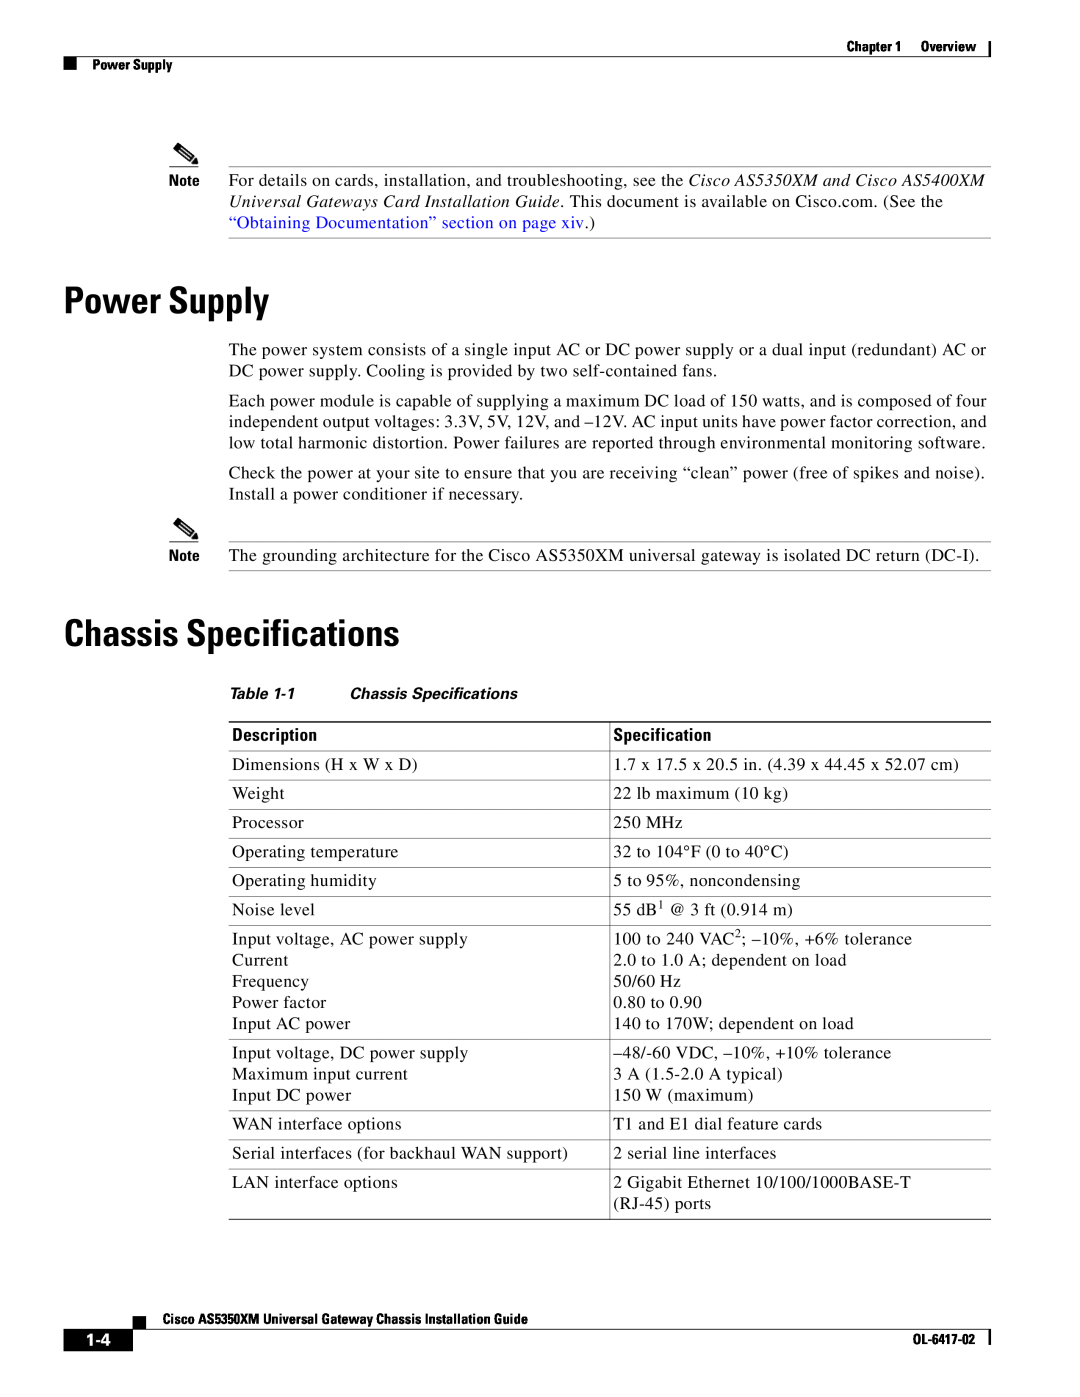 Cisco Systems AS5350XM manual Power Supply, Chassis Specifications 